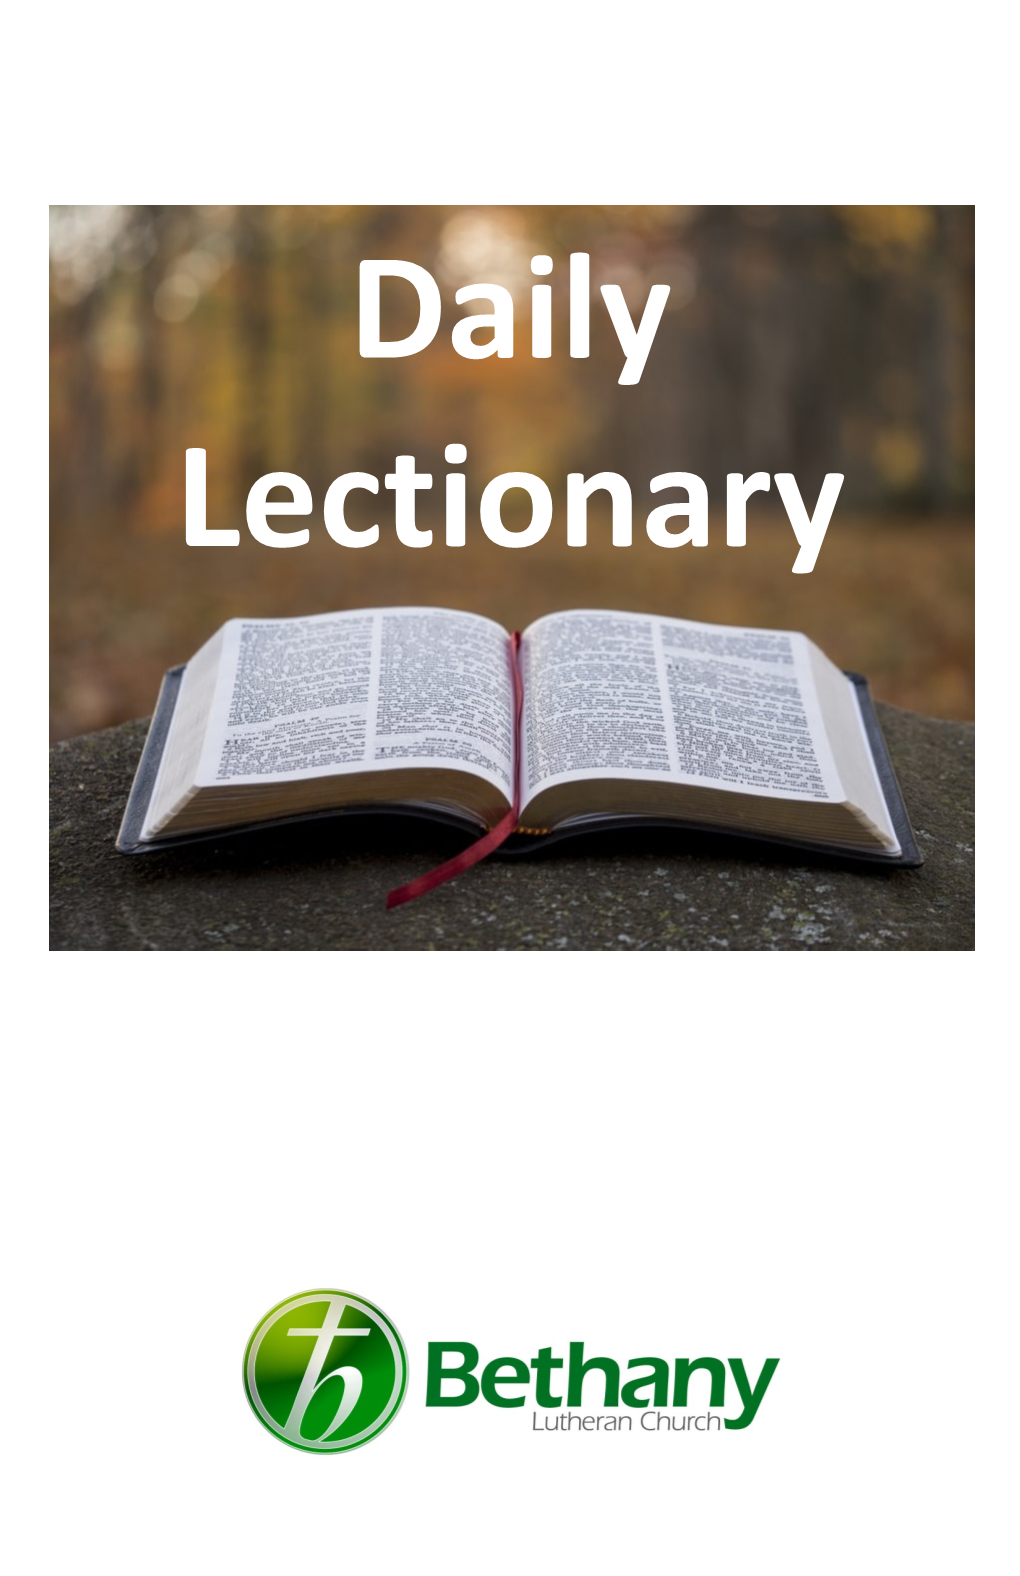 Daily Lectionary This Outline Is a Devotional Reading Plan That Covers the Entire Sacred Scriptures Each Year